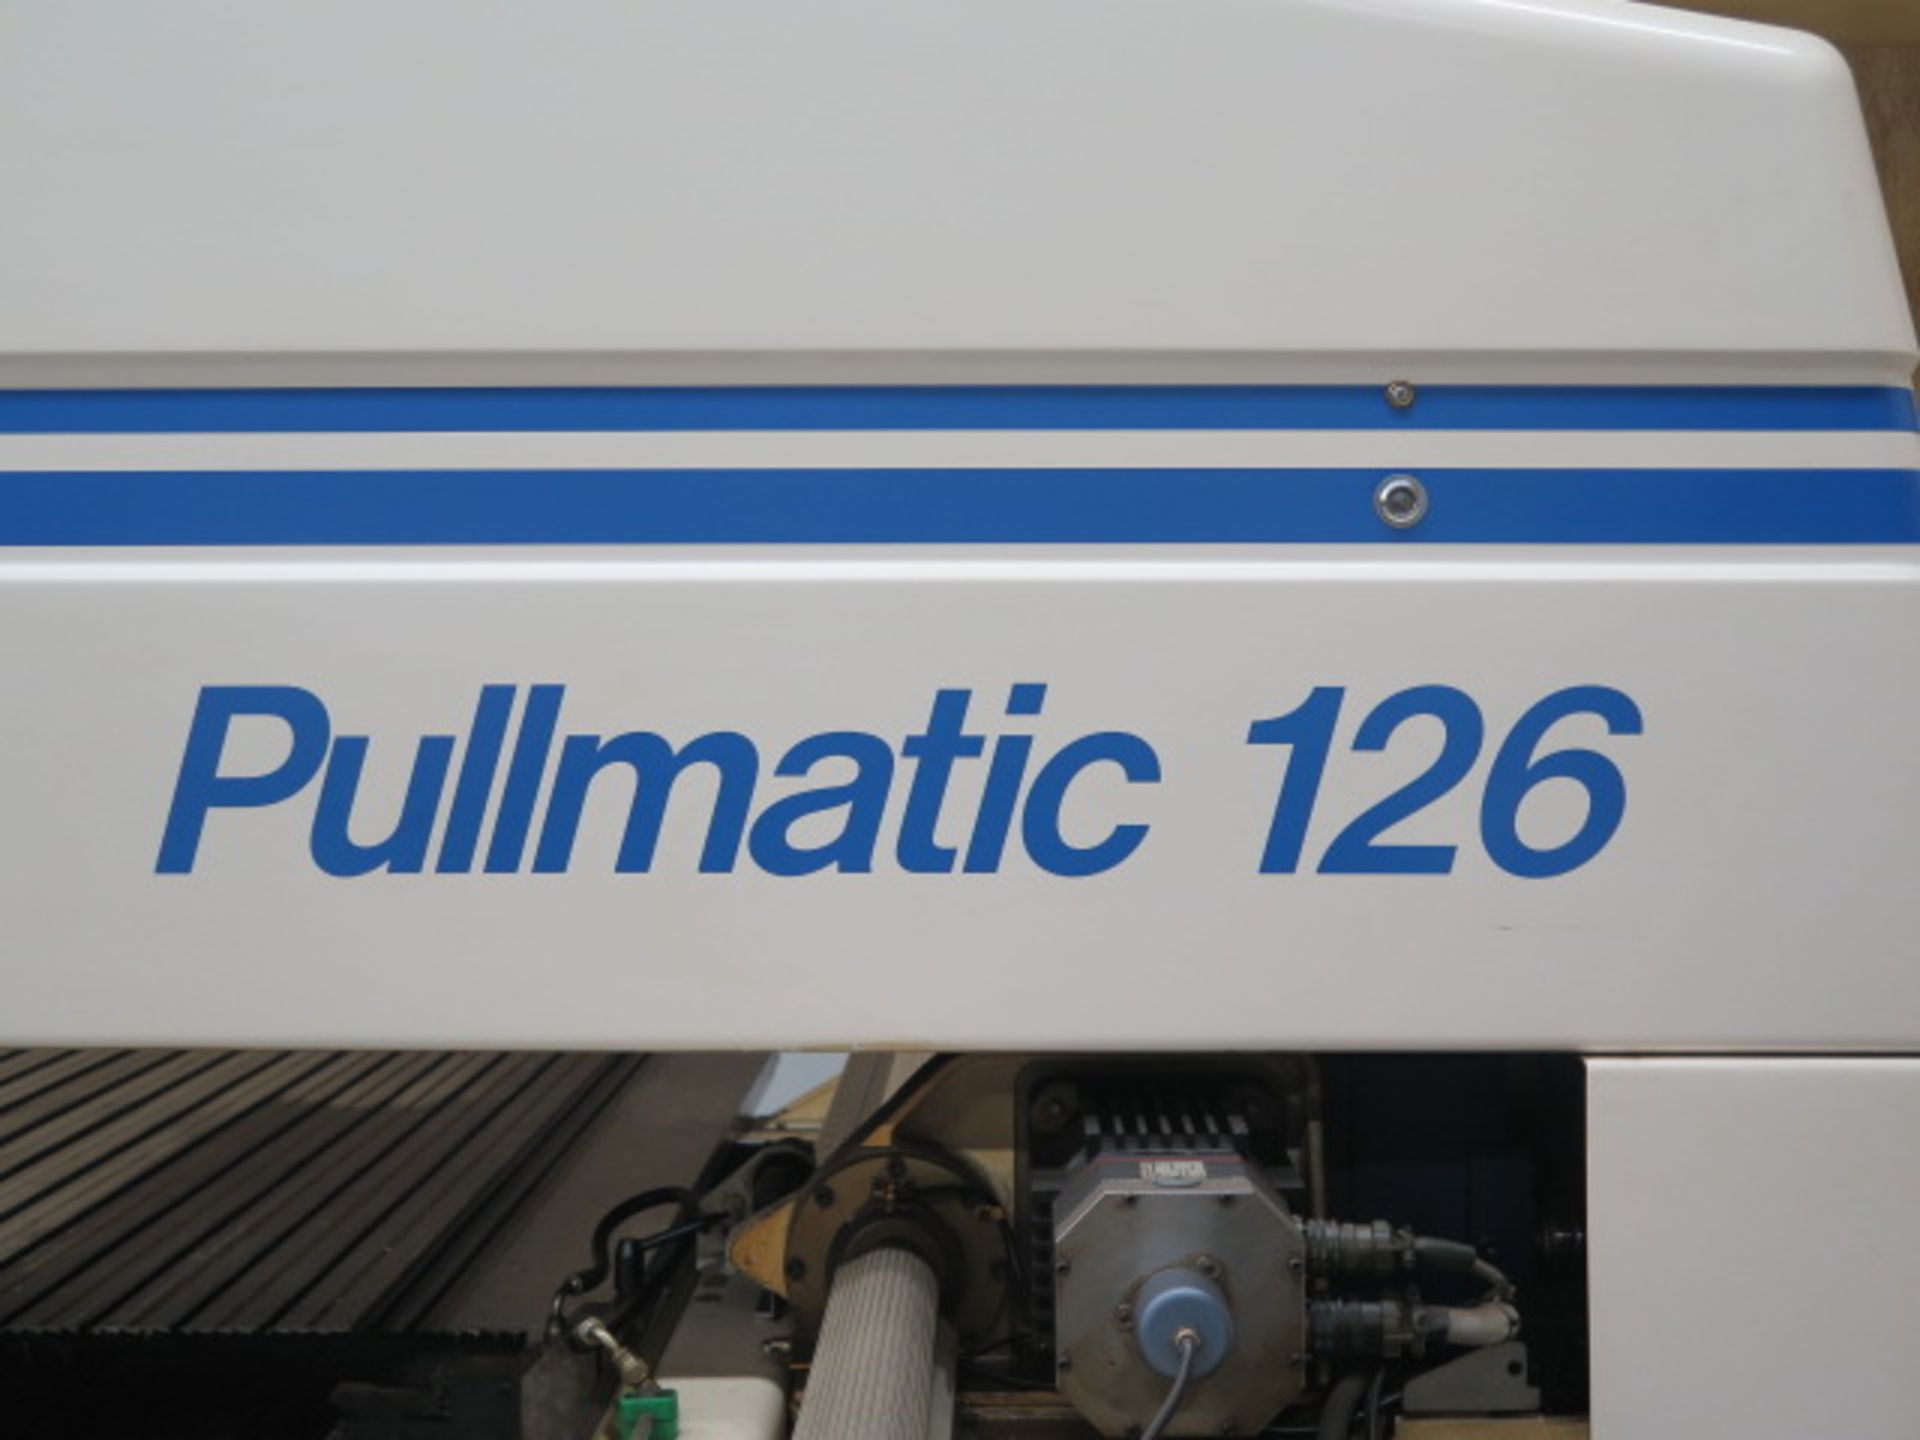 1996 Pullmax Pullmatic 126 33 Ton 15-Station CNC Turret Punch Press s/n 45000027, SOLD AS IS - Image 14 of 16